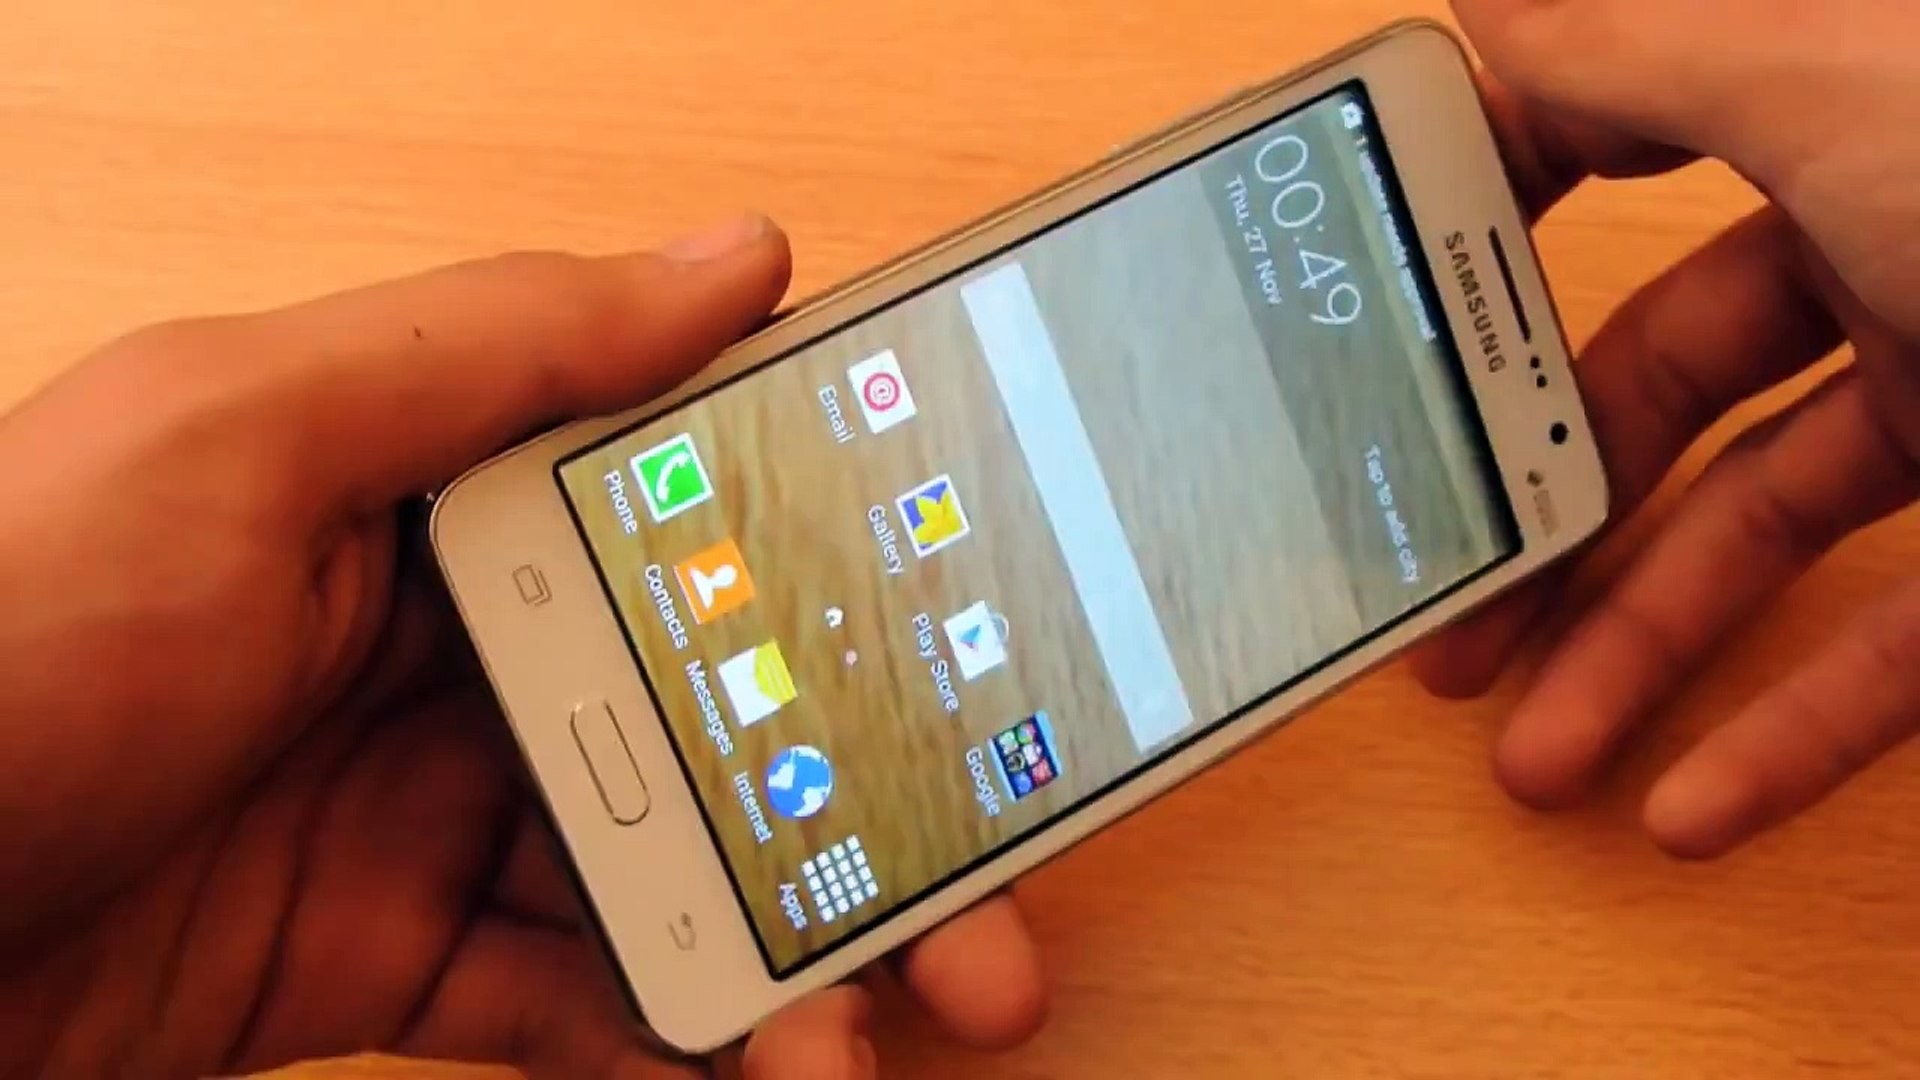 1920x1080 Samsung Galaxy Grand Prime - Why its Awesome!